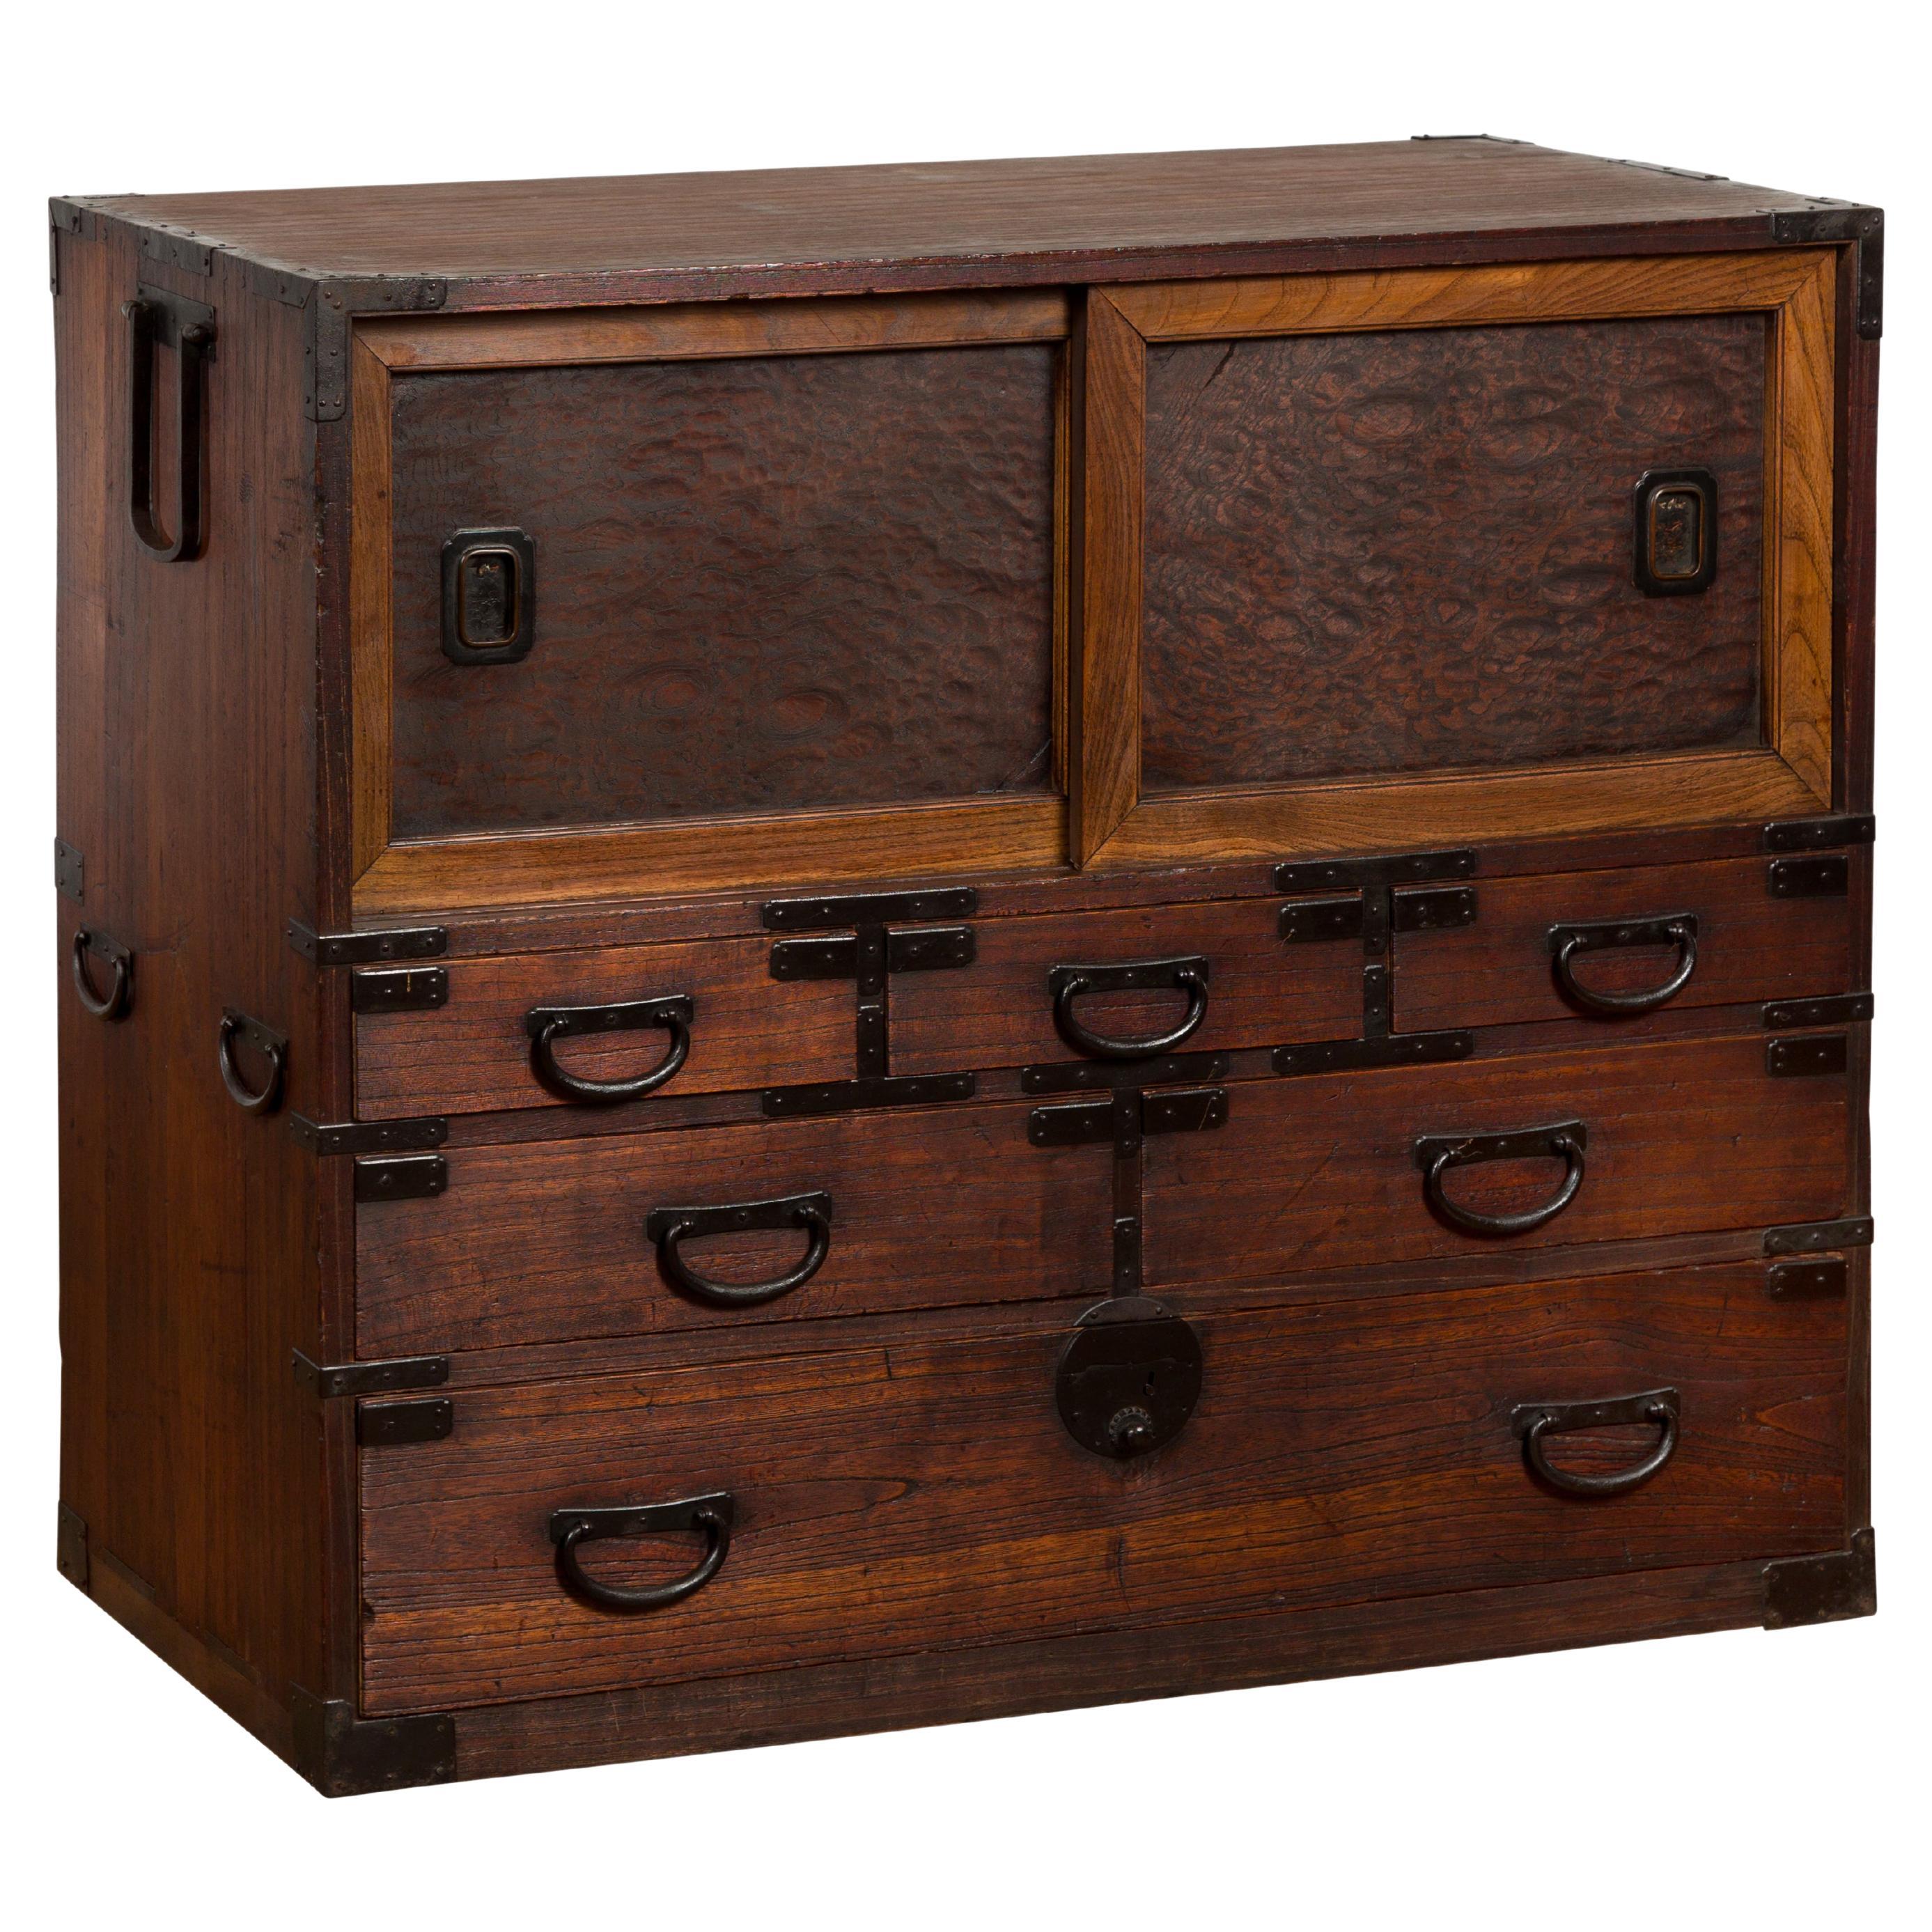 Japanese Meiji Period 19th Century Tansu Chest with Sliding Chest and Drawers For Sale